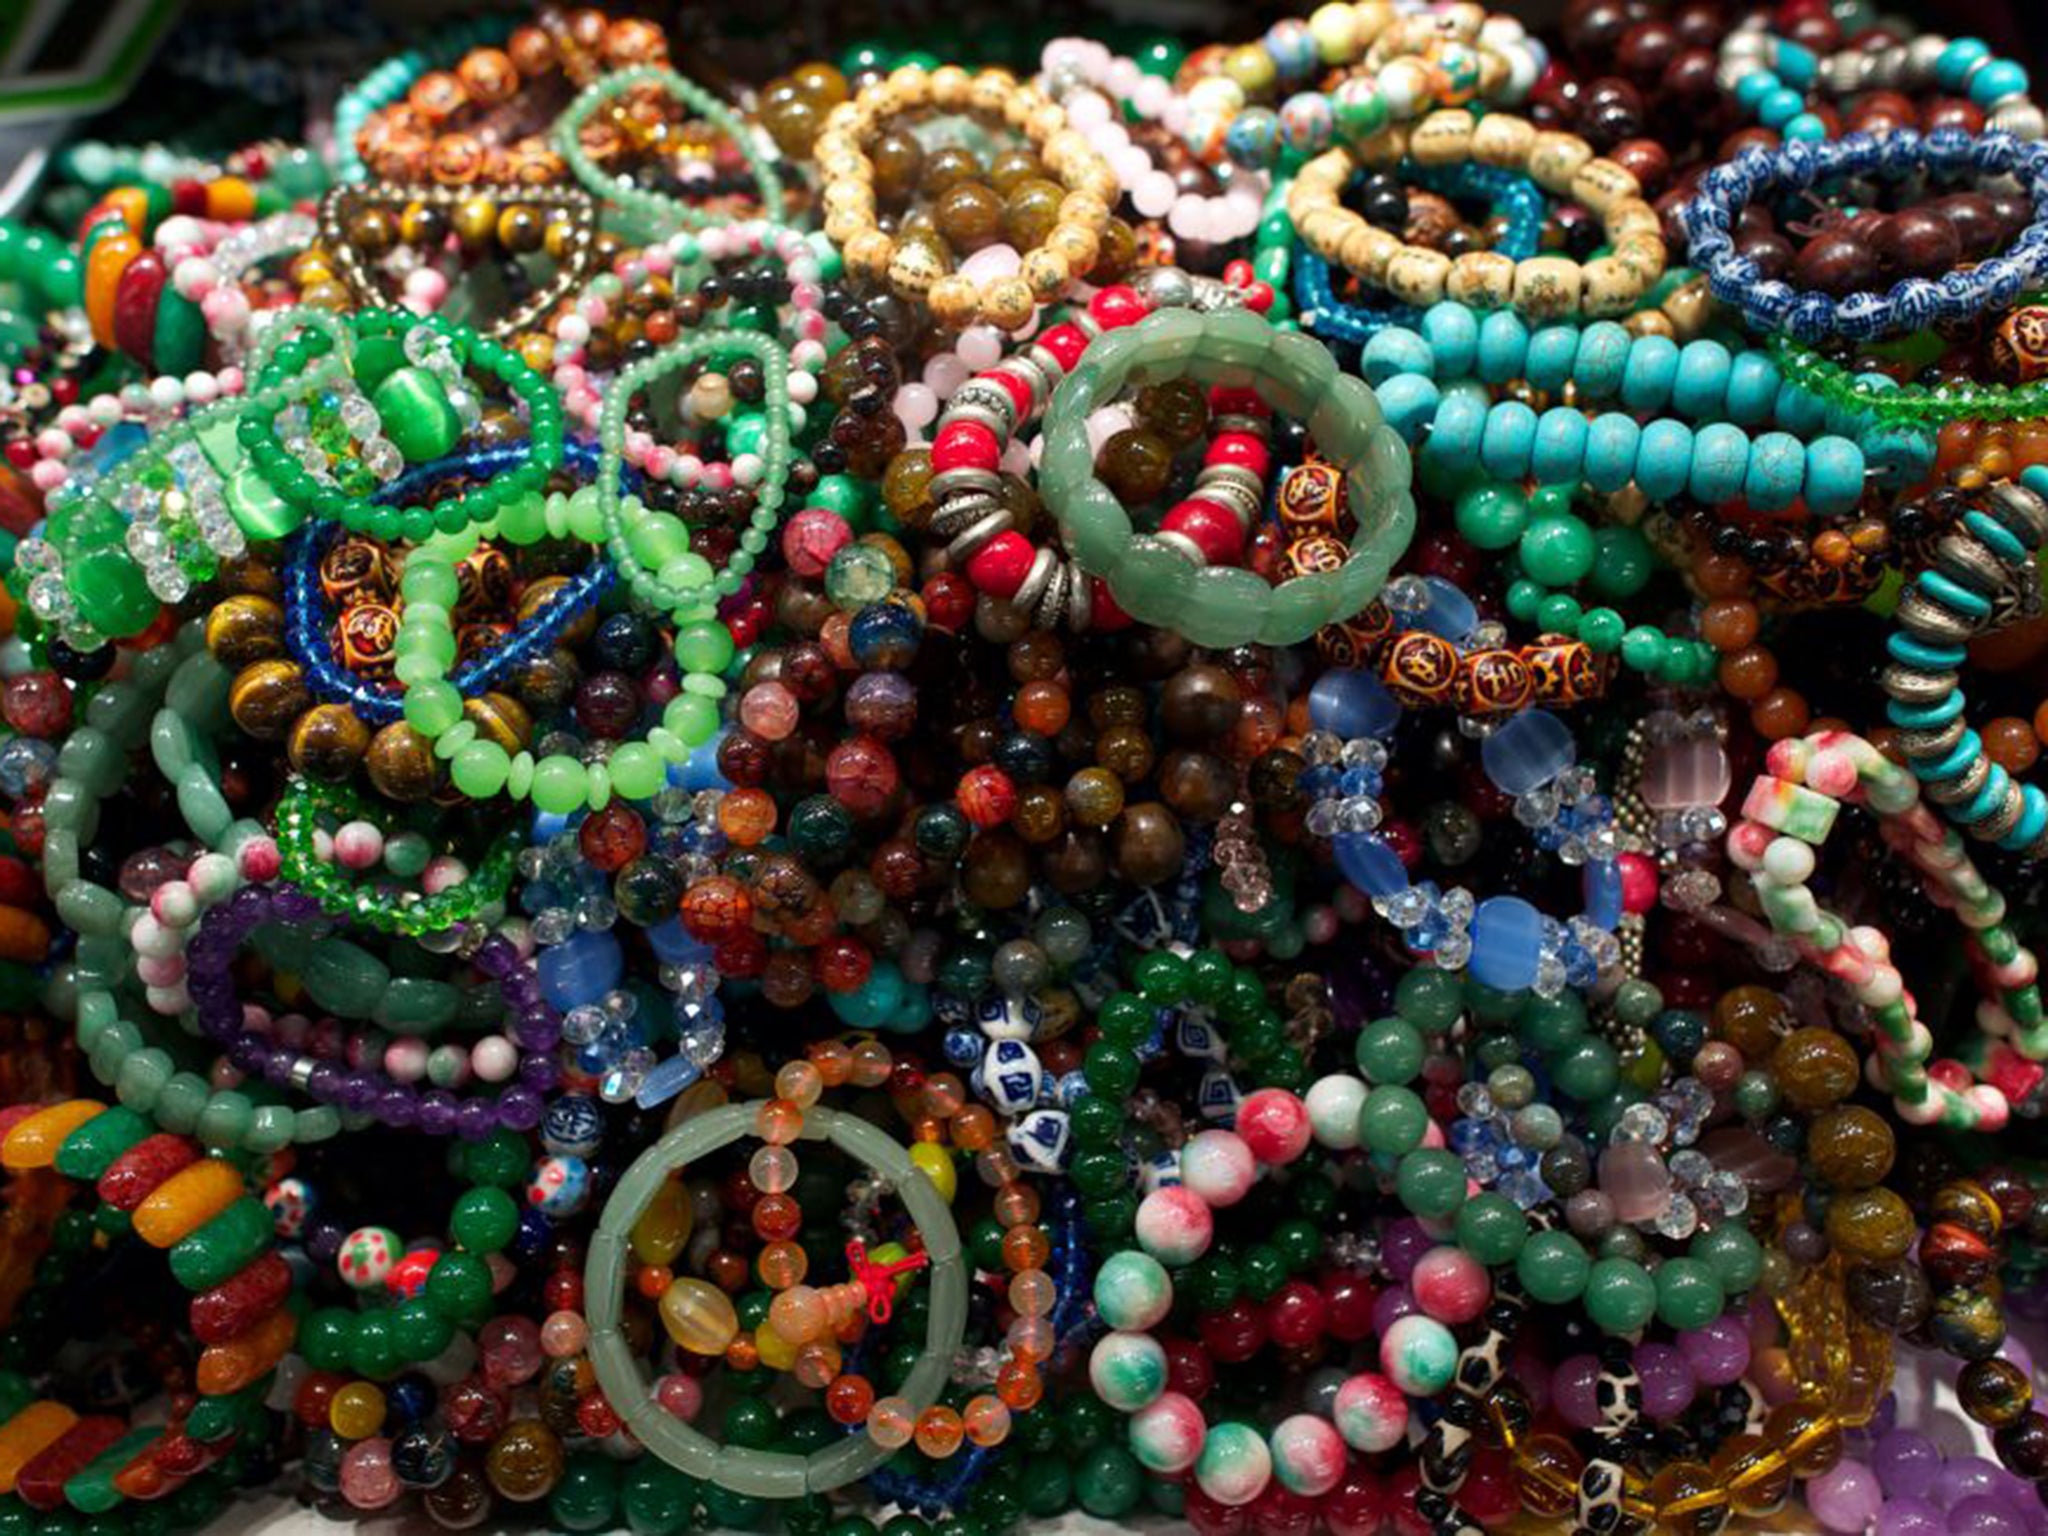 Burma’s total trade in jade is valued at £20bn with firms controlled by members of the former junta profiting, and there are fears that some of this money could influence next month’s general elections